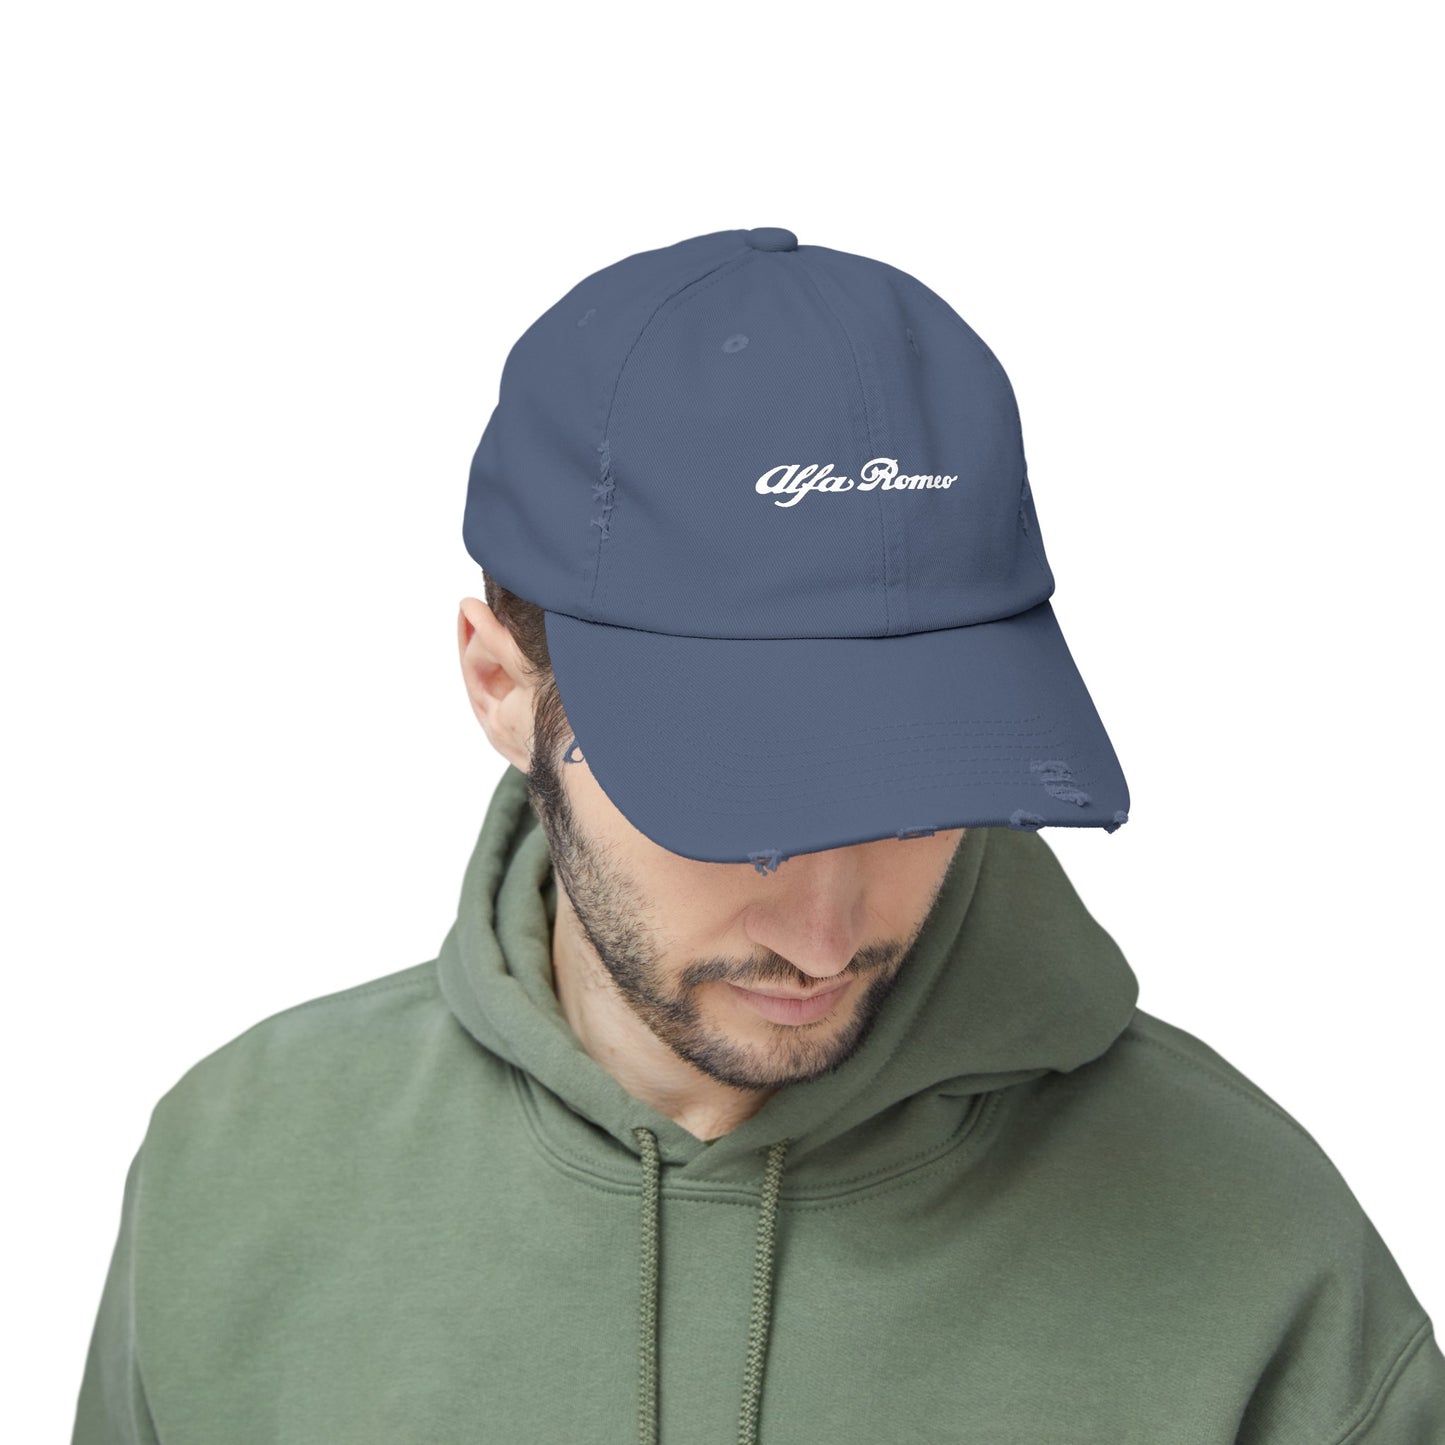 Alfa Romeo Script Logo Distressed Cap - Unisex 100% Cotton Twill - Adjustable Fit - Stylish and Durable - Perfect for Car Enthusiasts